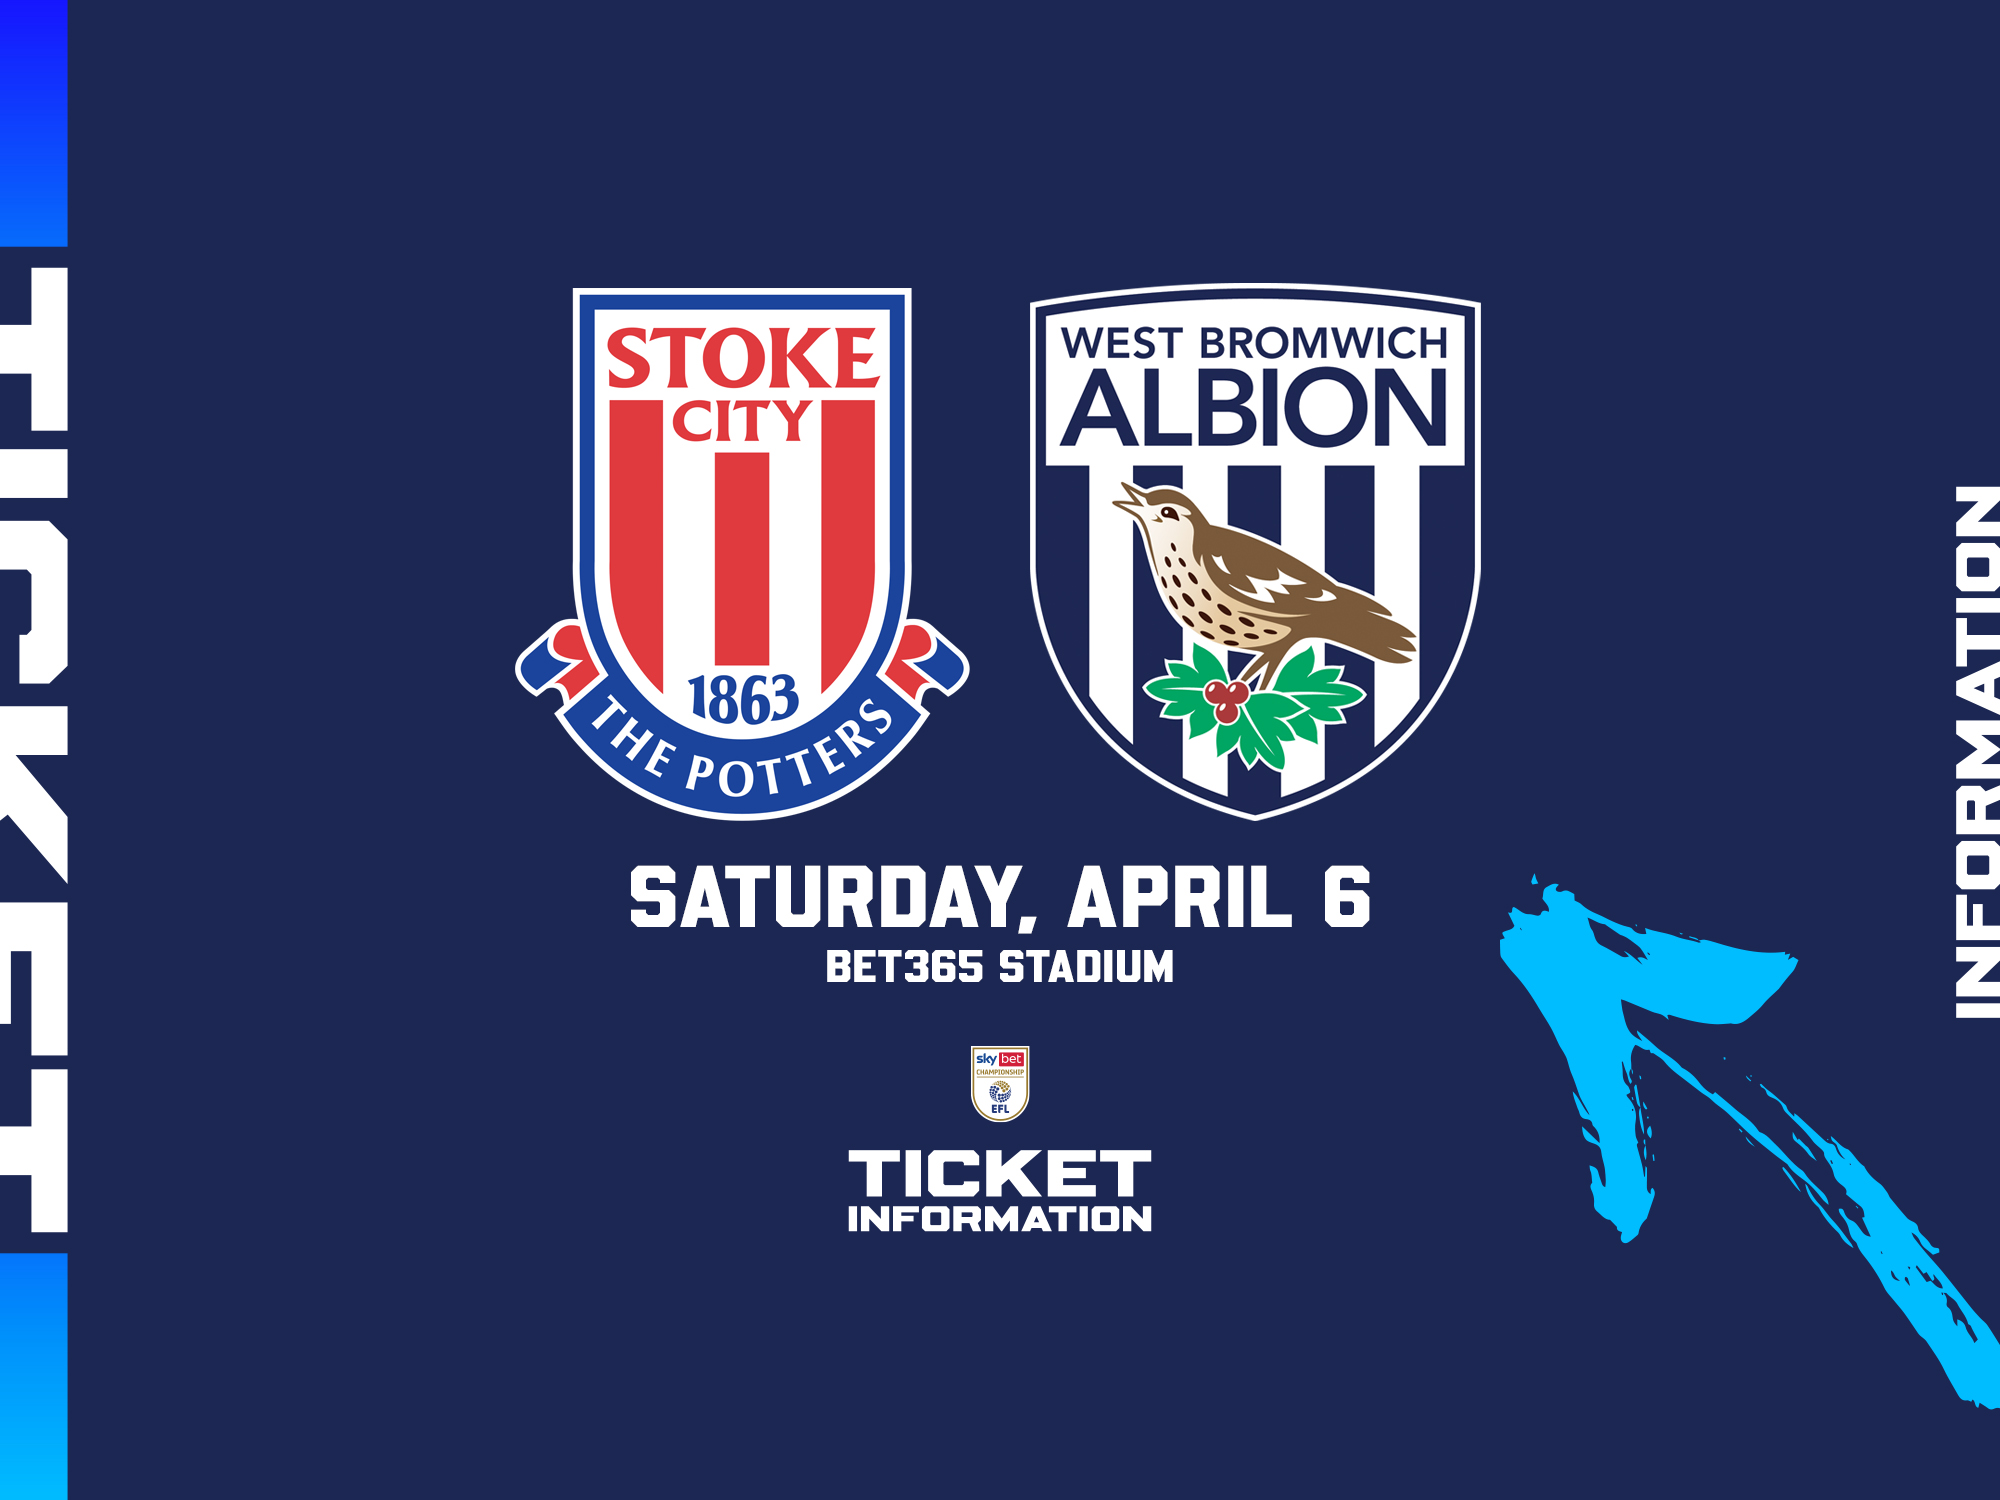 A ticket graphic displaying information for Albion's game against Stoke